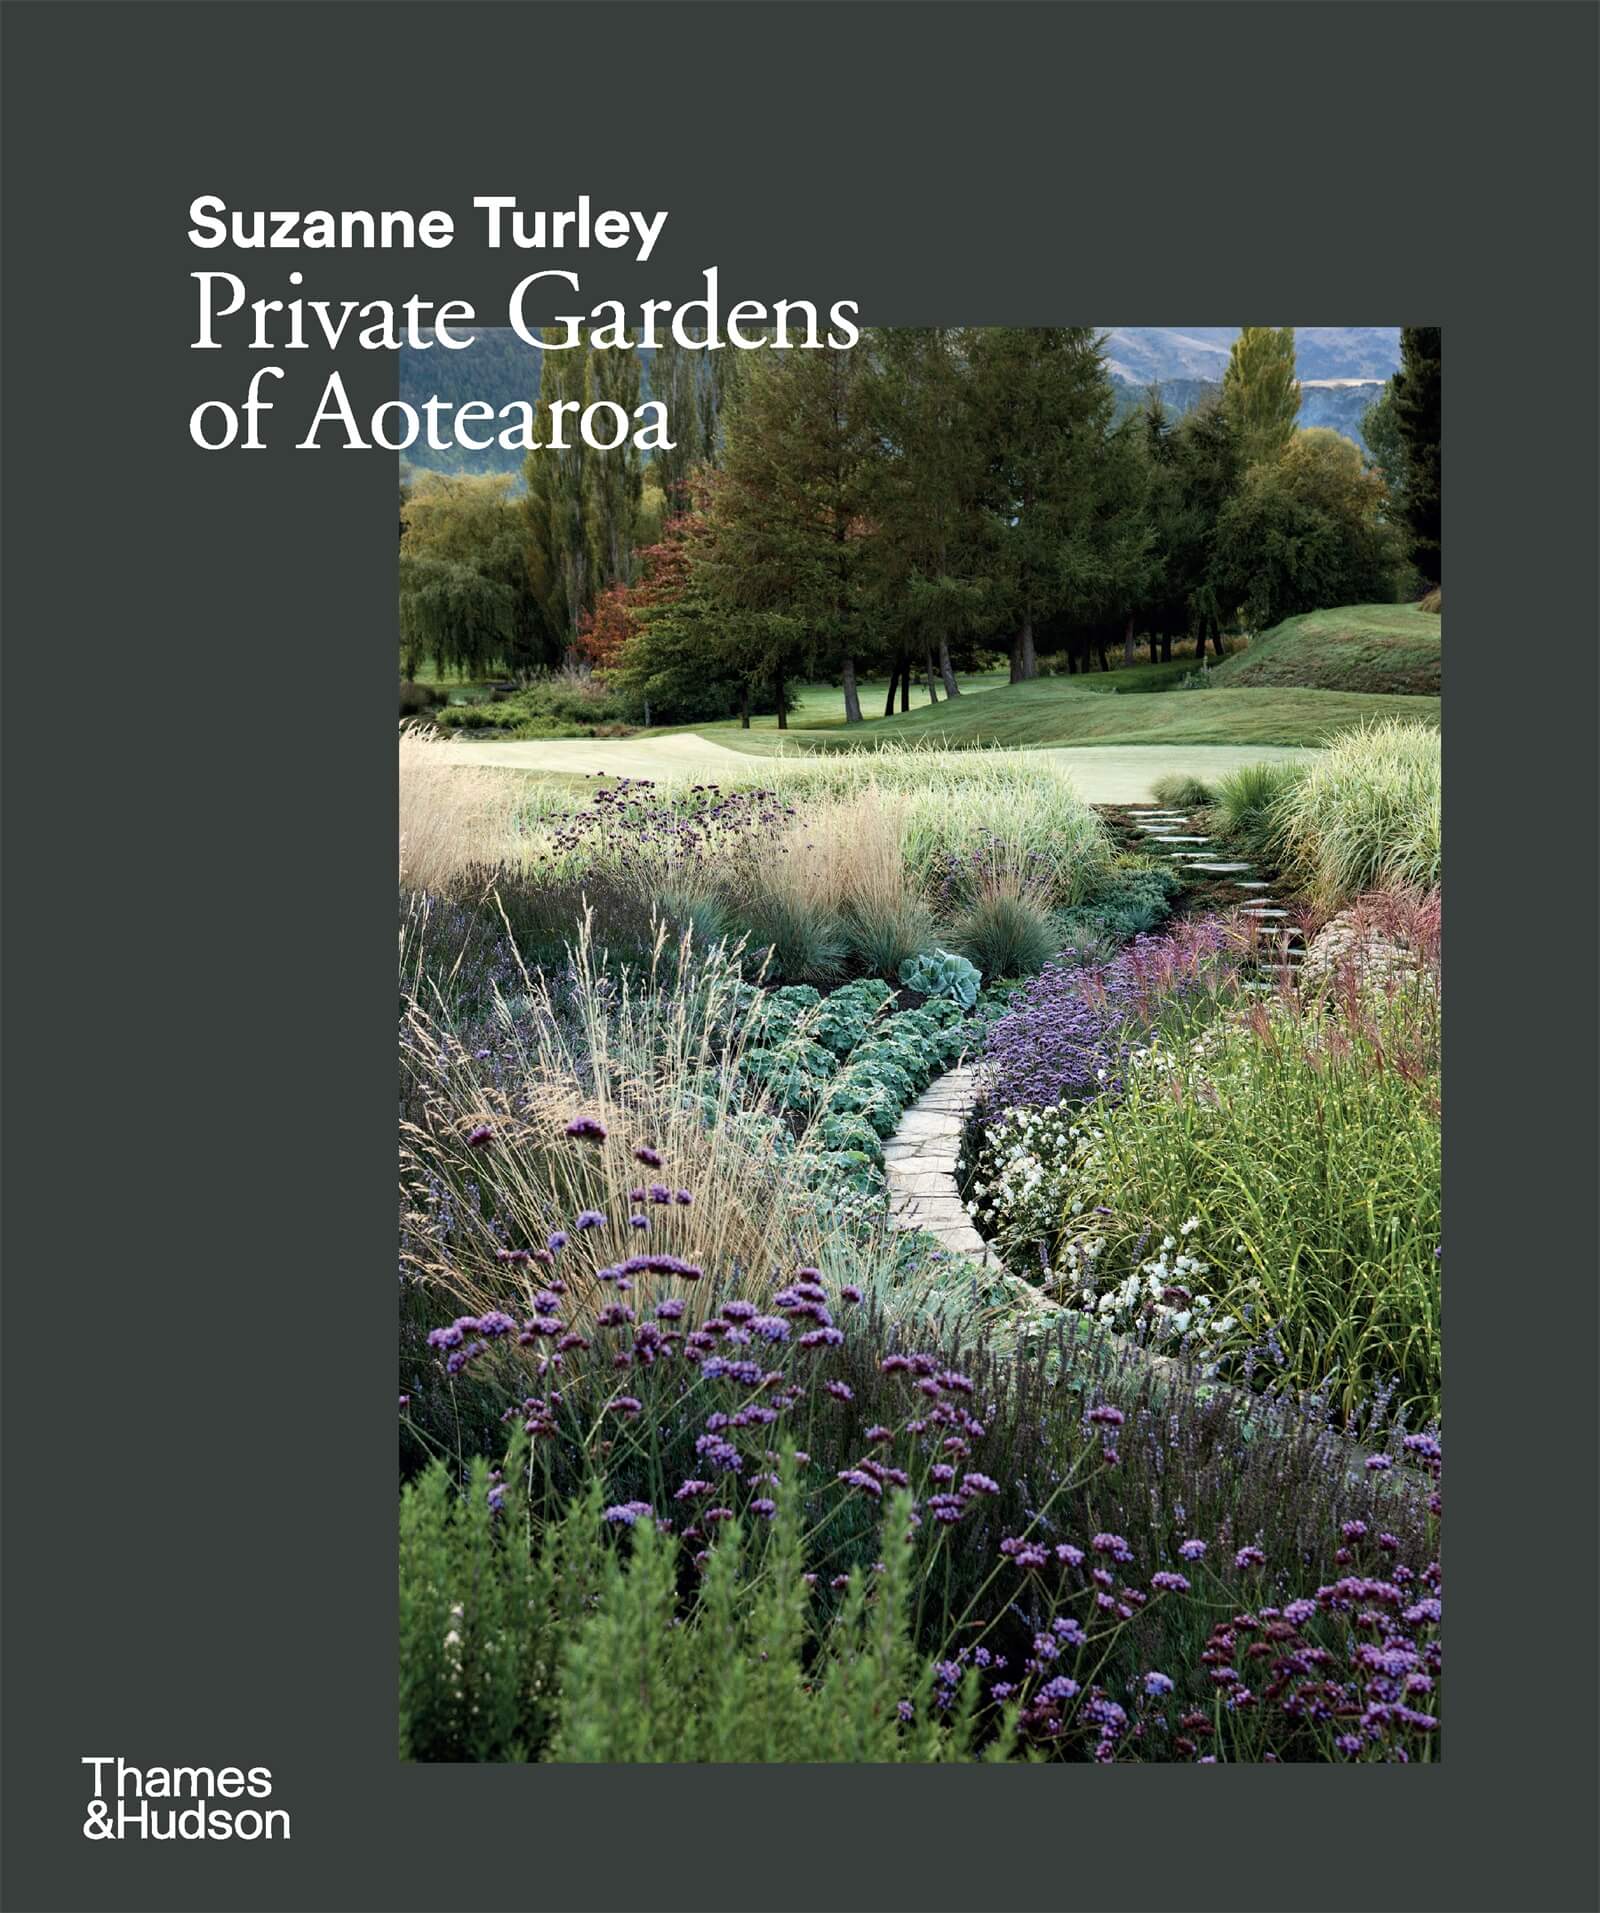 olive green cover image with photo of Lavendar garden placed off center. Title of 'Private Gardens of Aotearoa' written in white, serif fontin top left